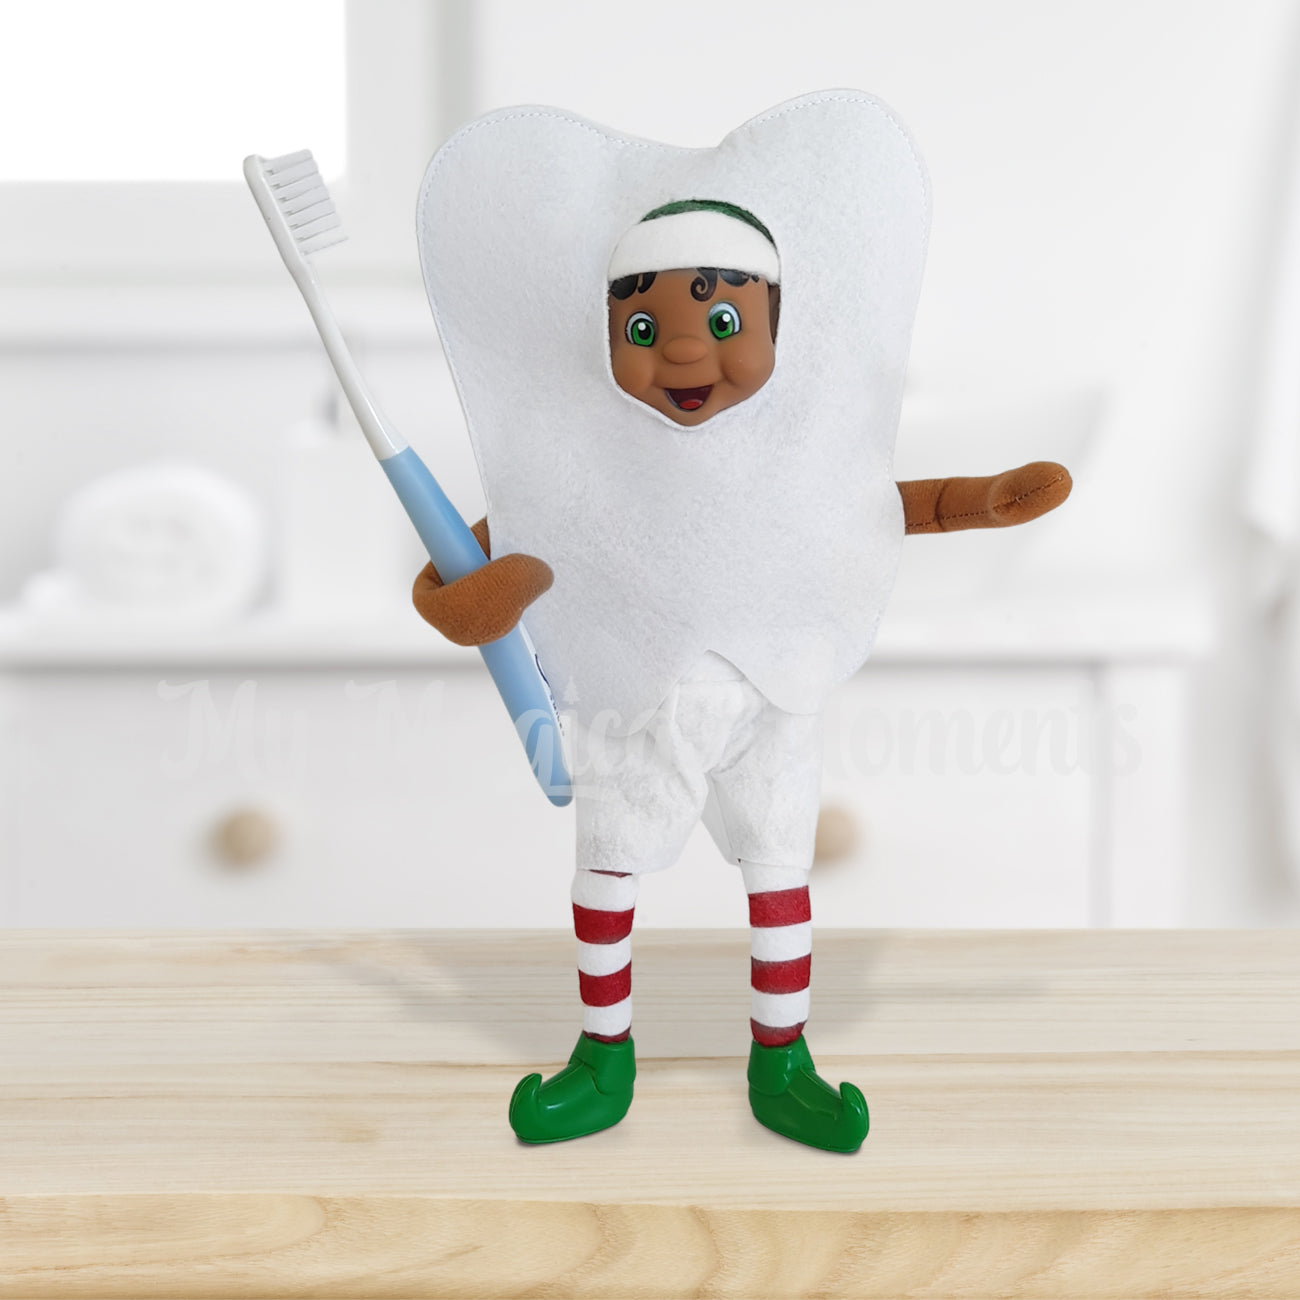 Elf dressed in a tooth costume holding a toothbrush in a bathroom